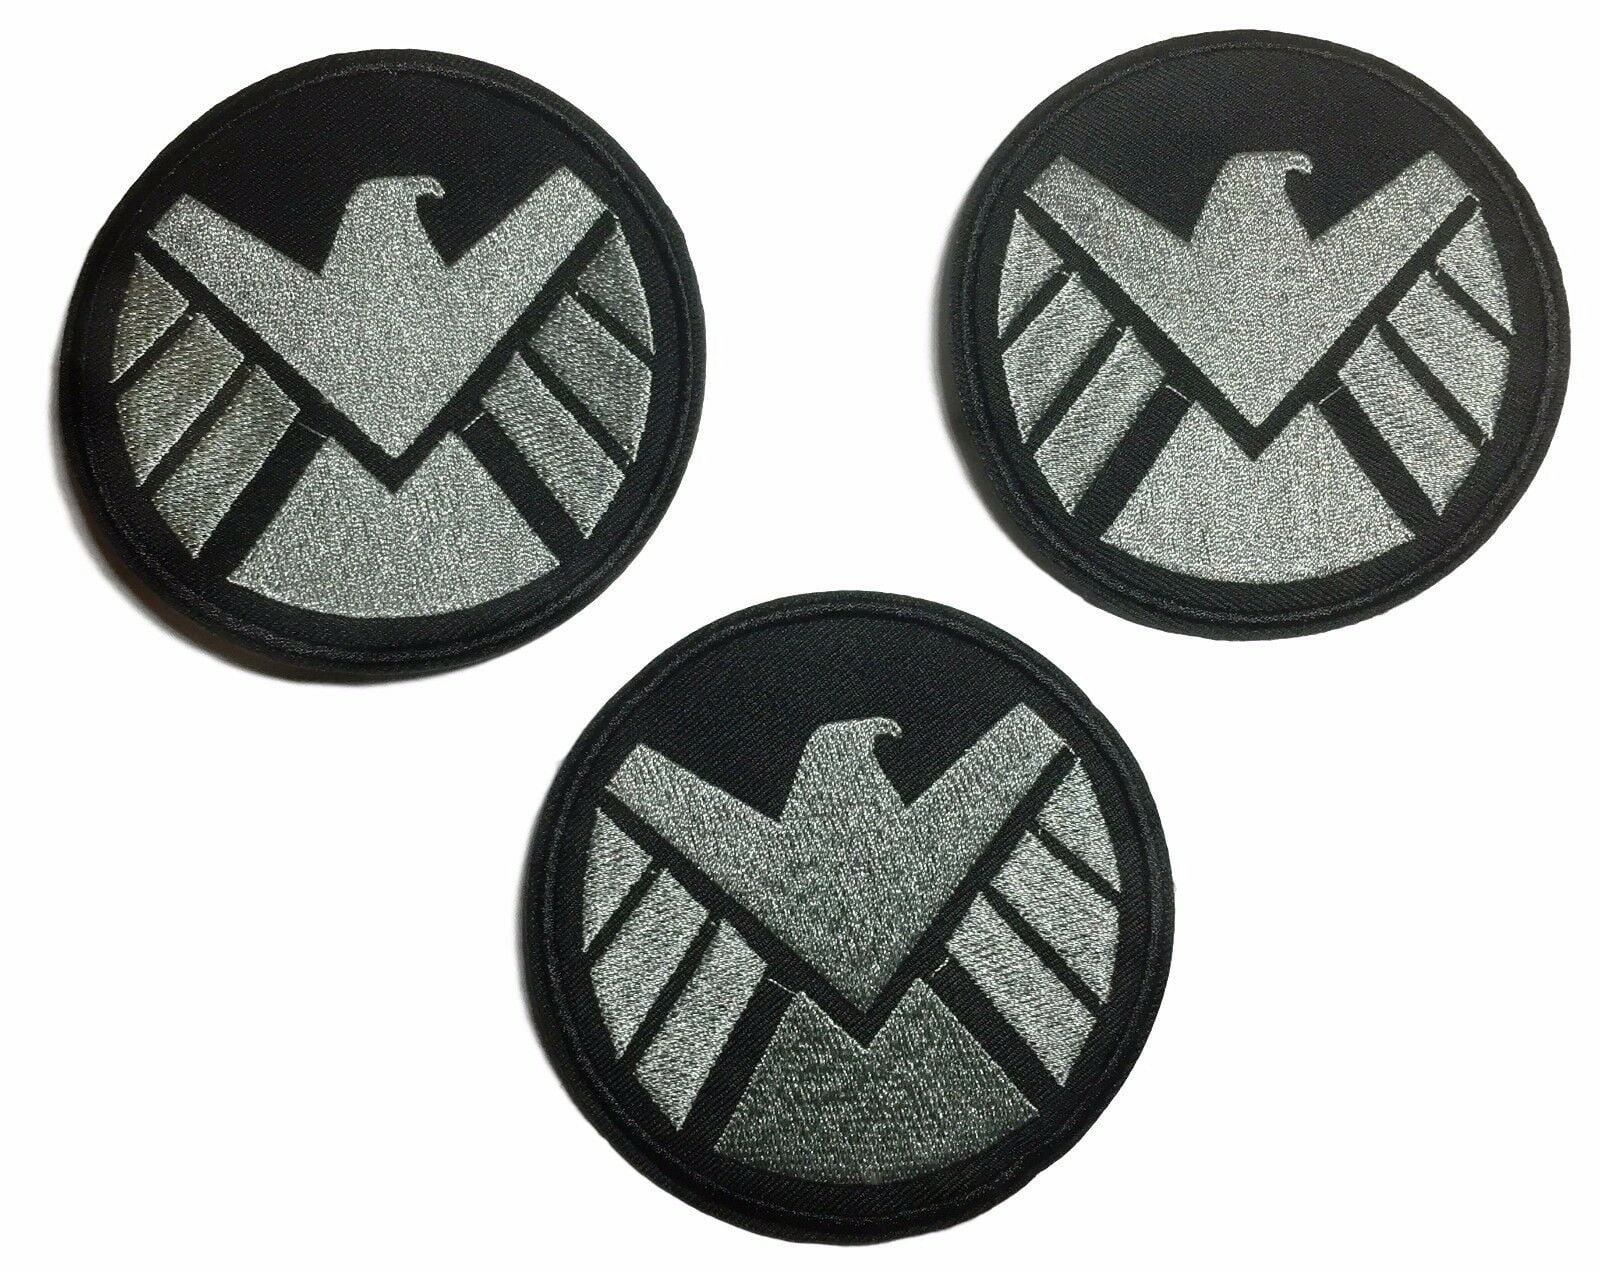 Avengers Agents of Shield Uniform/Cosplay Black & Blue Patch  3 1/4 in 